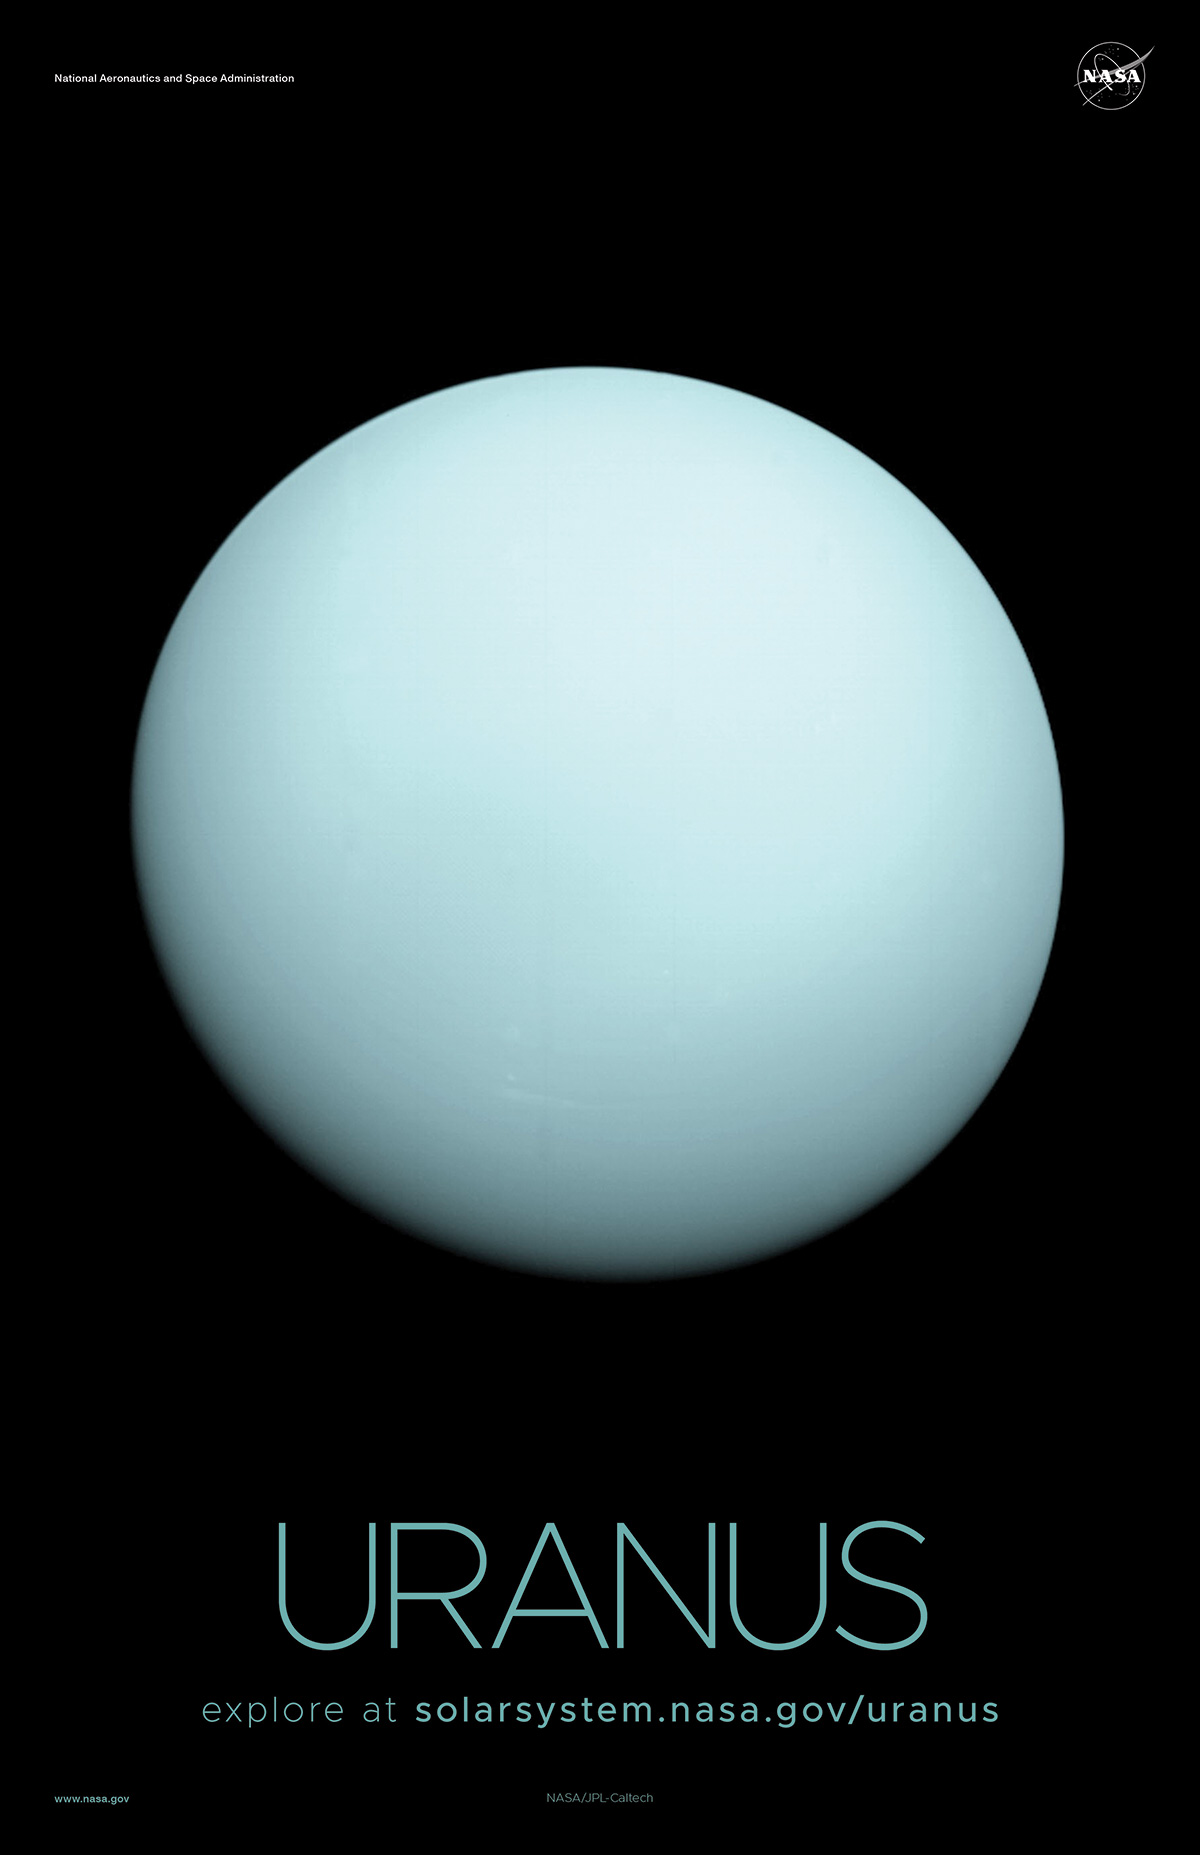 Poster with a full disk image of Uranus.